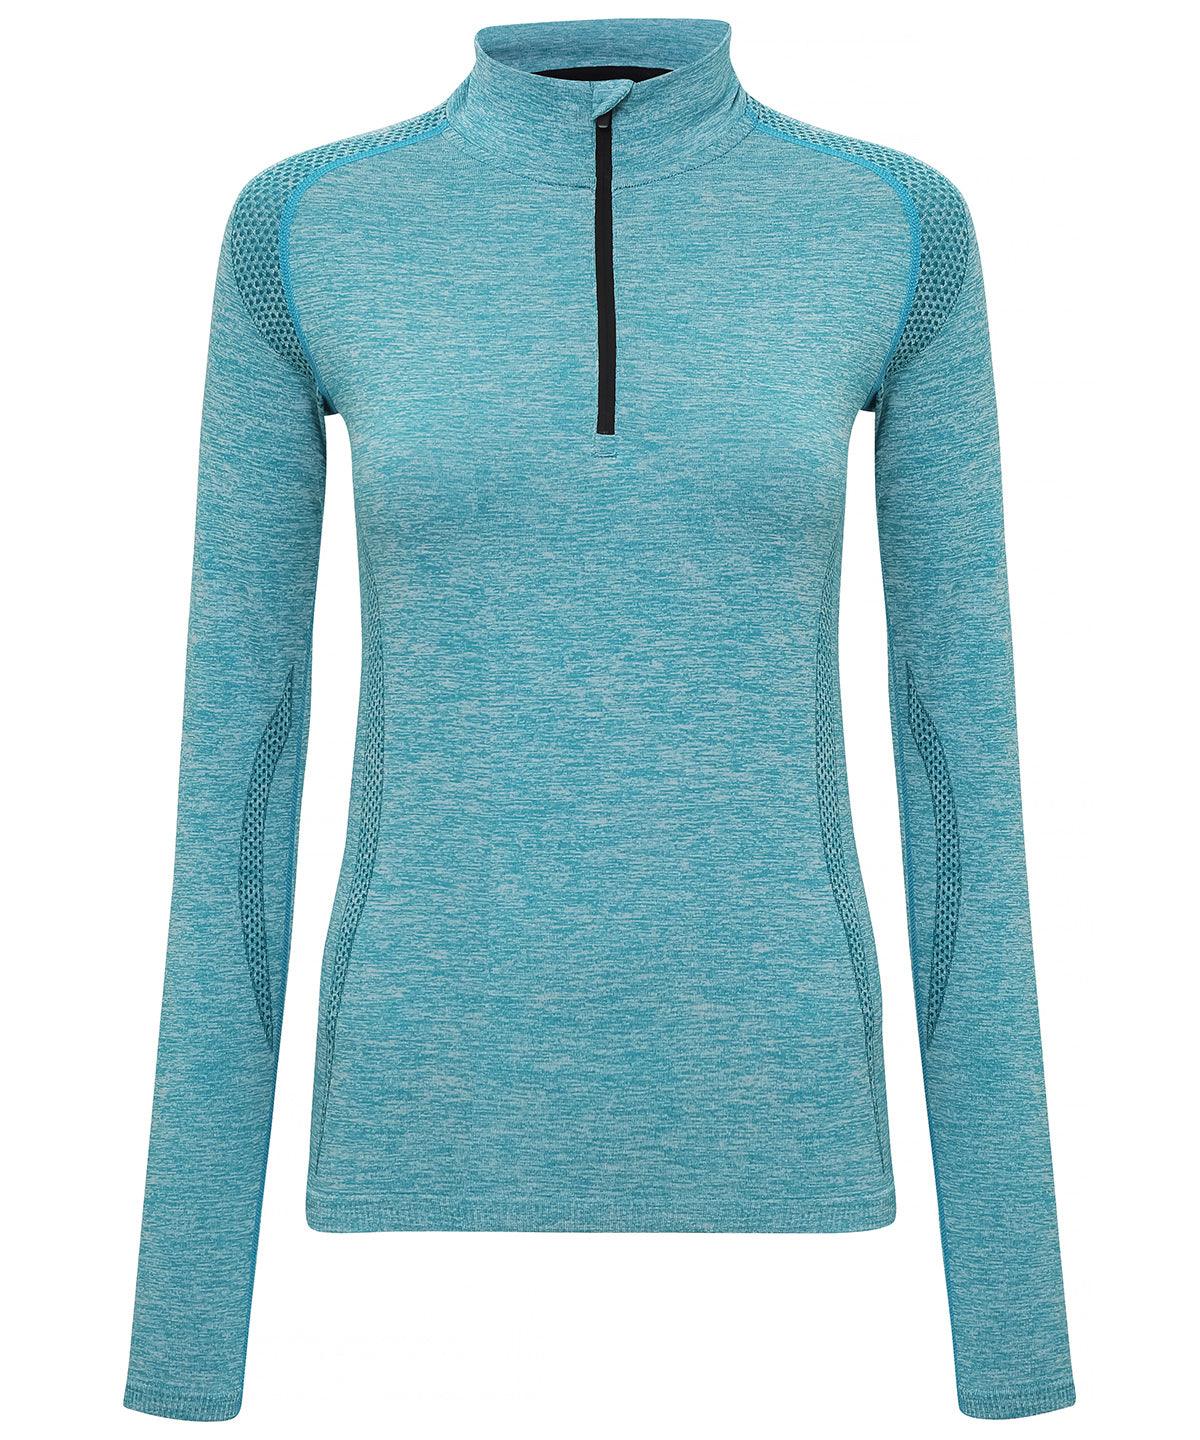 Turquoise - Women's TriDri® seamless '3D fit' multi-sport performance zip top Sports Overtops TriDri® Activewear & Performance, Exclusives, Must Haves, Outdoor Sports, Raladeal - Recently Added, Sports & Leisure, Team Sportswear Schoolwear Centres